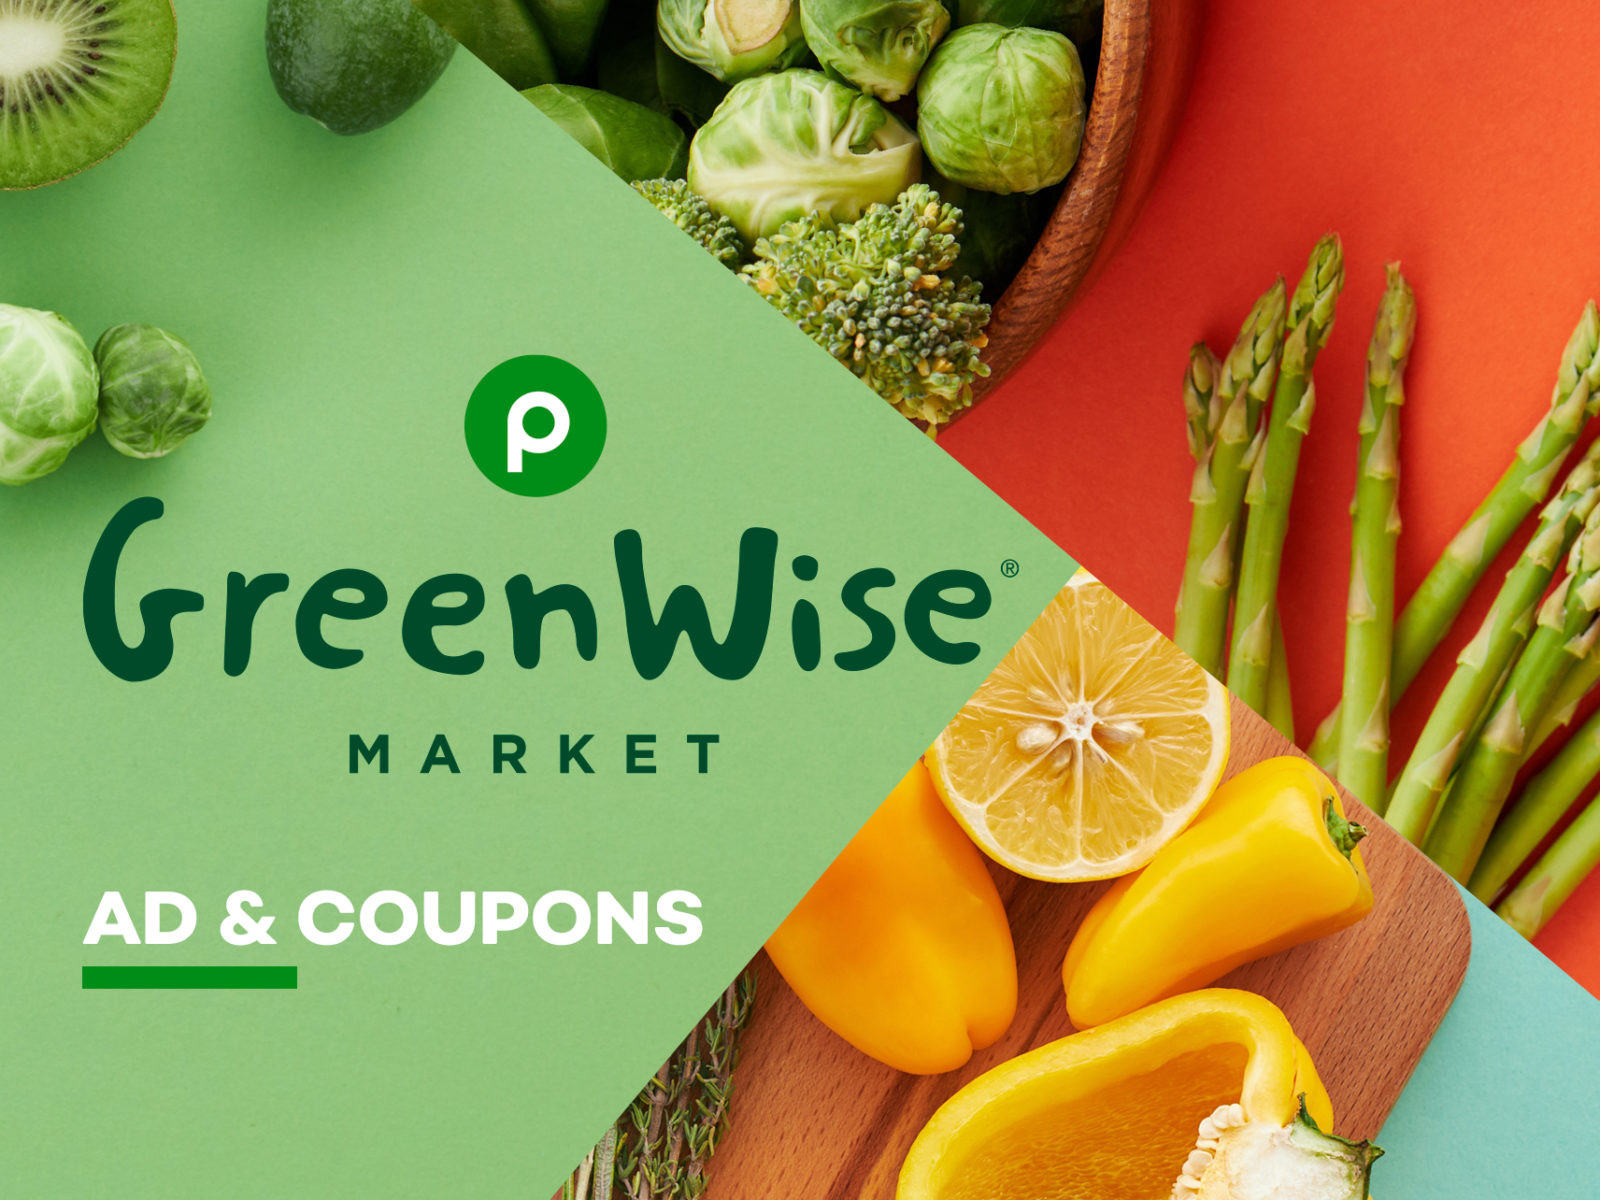 Publix GreenWise Market Ad & Coupons Week Of 9/14 to 9/21 (9/14 to 9/20 For Some)